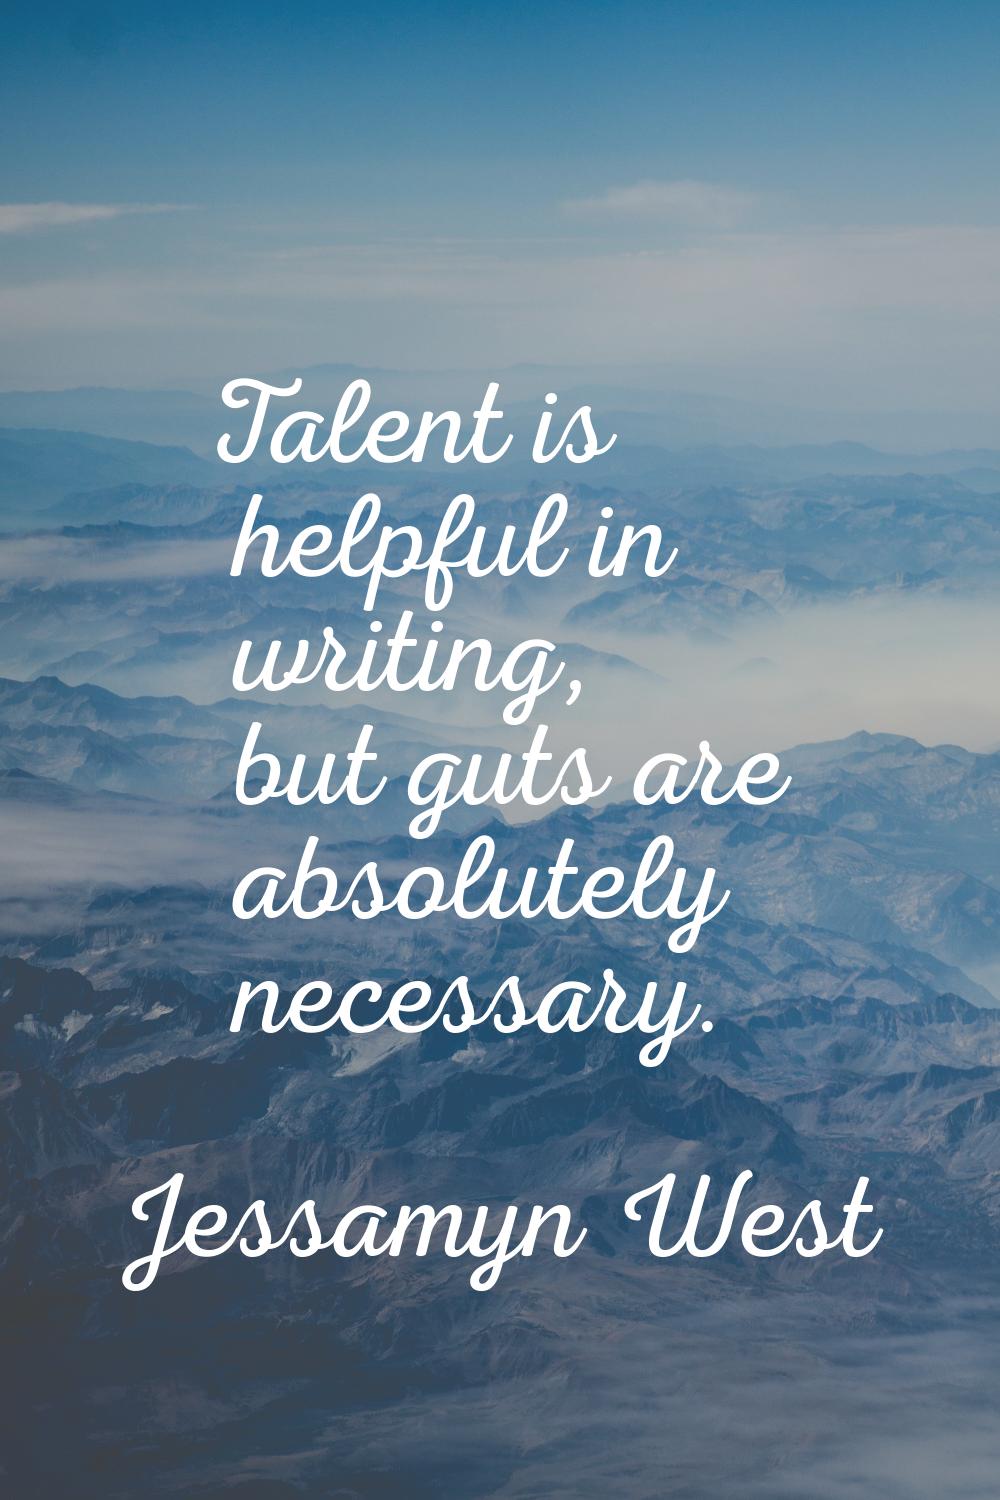 Talent is helpful in writing, but guts are absolutely necessary.